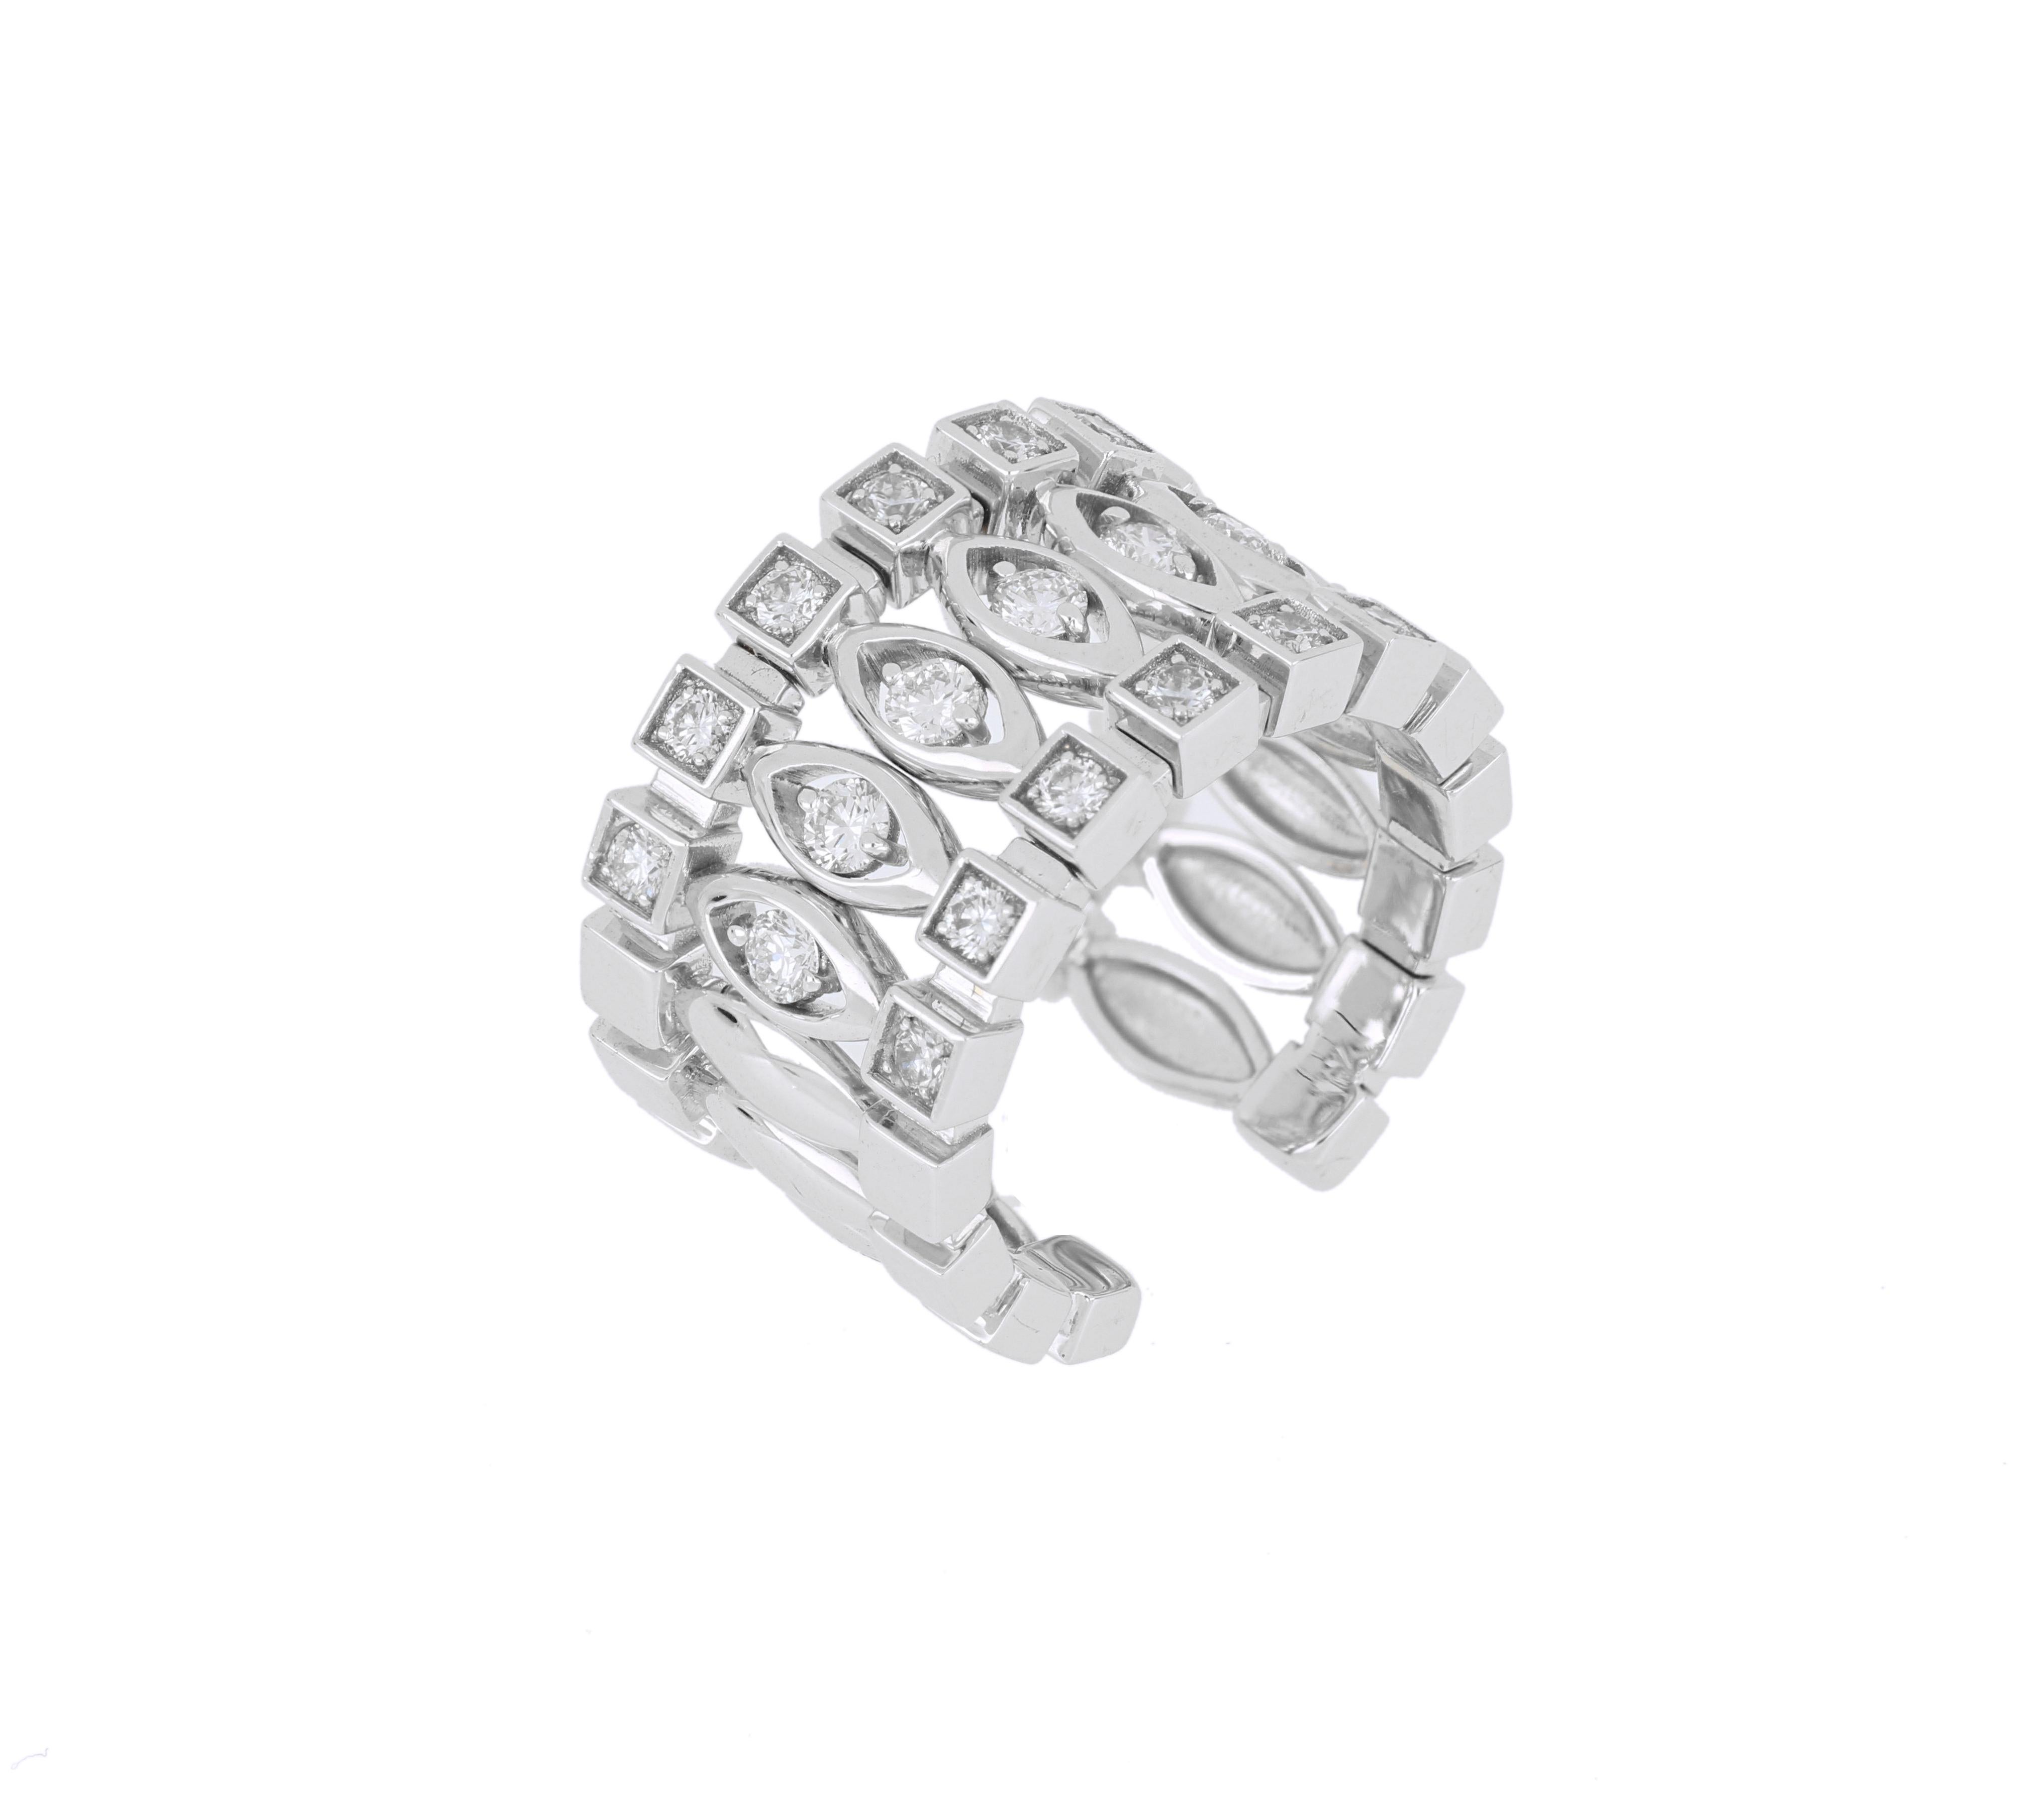 This stunning ring is elegant, unique, and inspired by the gorgeous Greta Garbo. This beautiful ring has striking, bold square adornments and soft, elongated ovals and is simply irresistible. 
18k white gold, this ring is adorned gracefully with